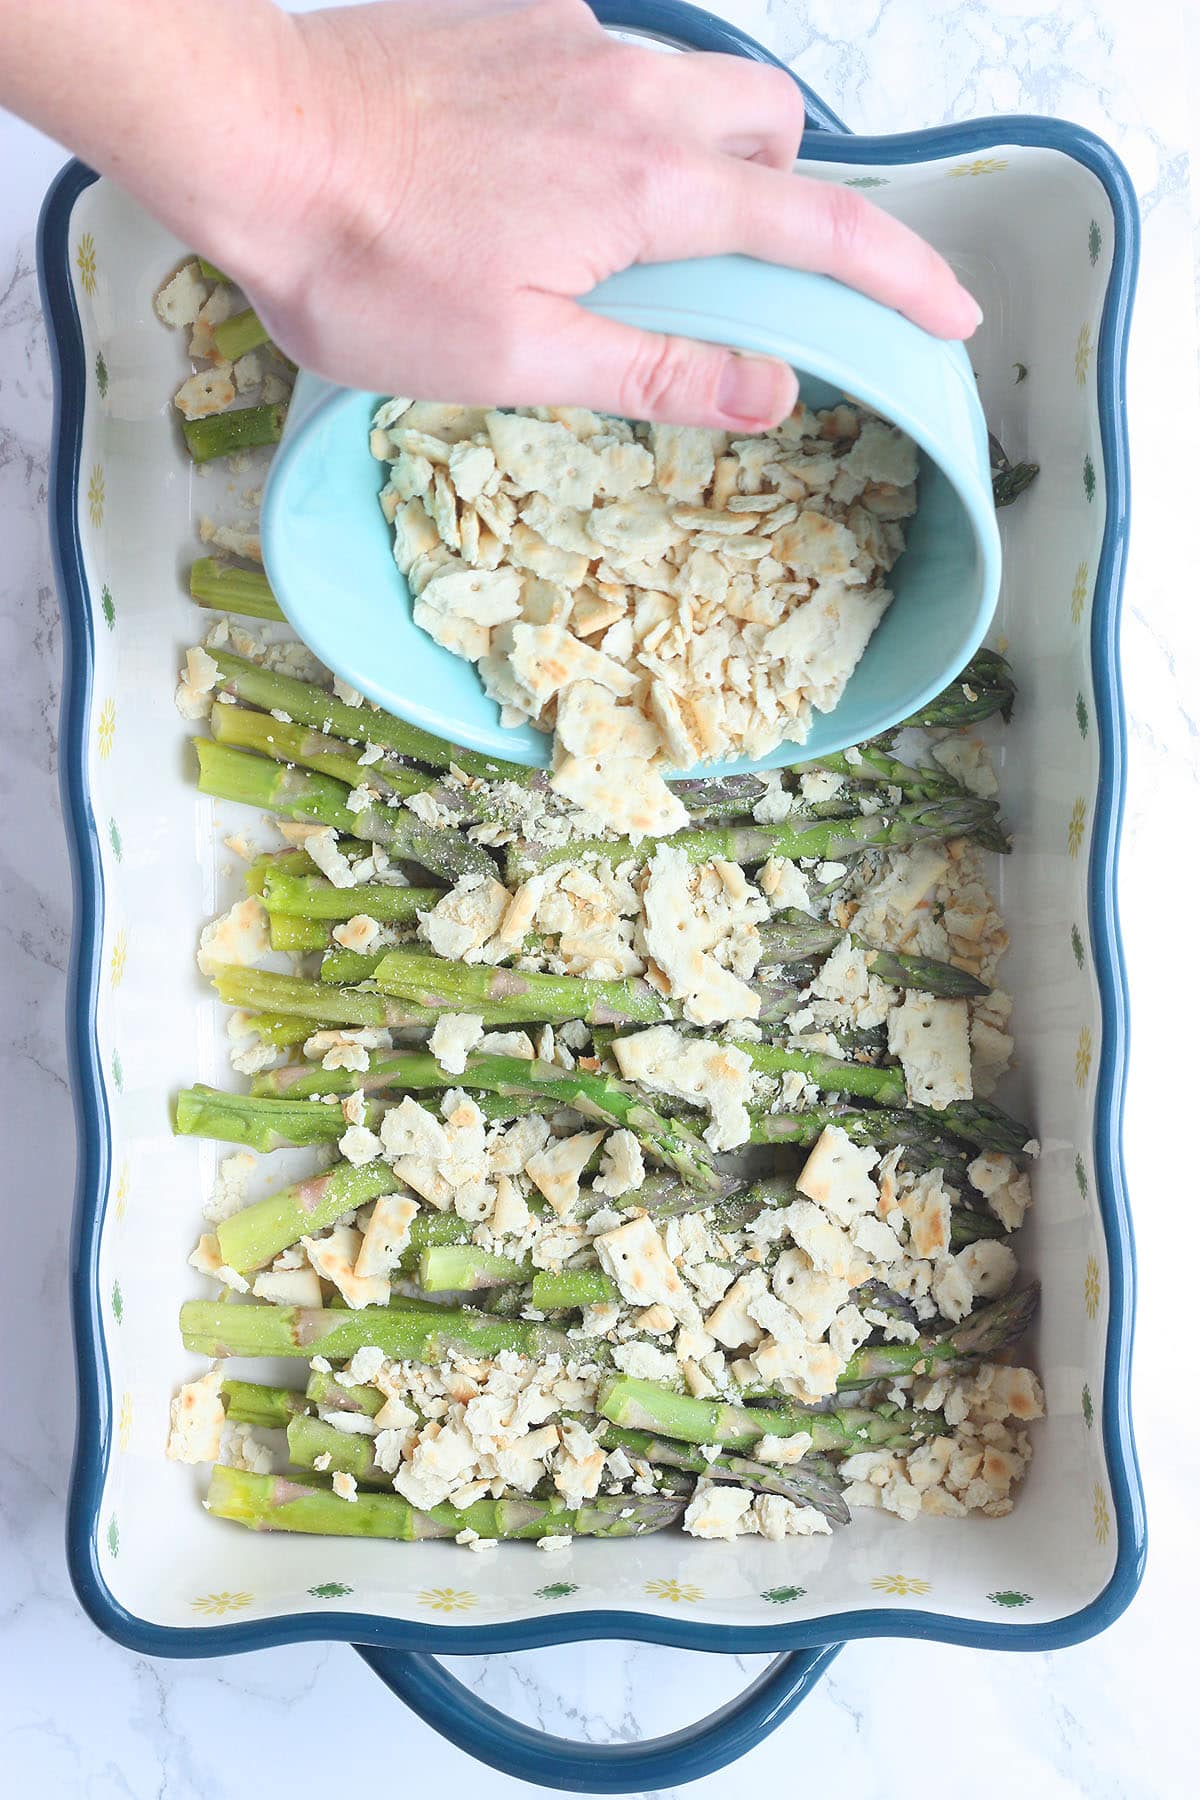 hand sprinkling crushed saltines over asparagus spears in a casserole dish